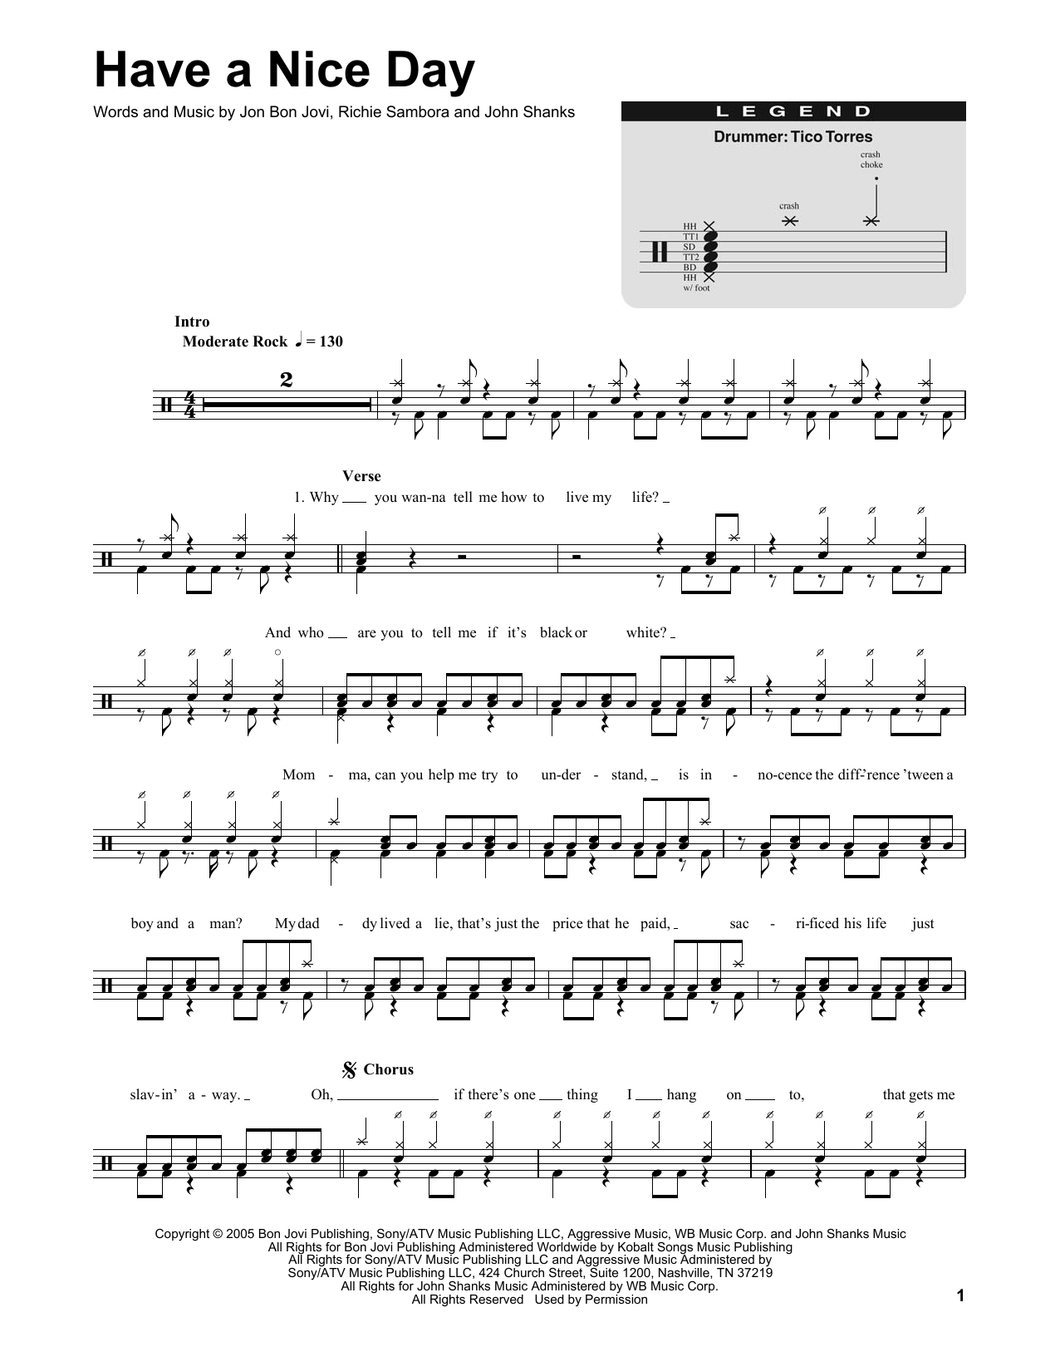 Have a Nice Day - Bon Jovi - Full Drum Transcription / Drum Sheet Music - SheetMusicDirect DT